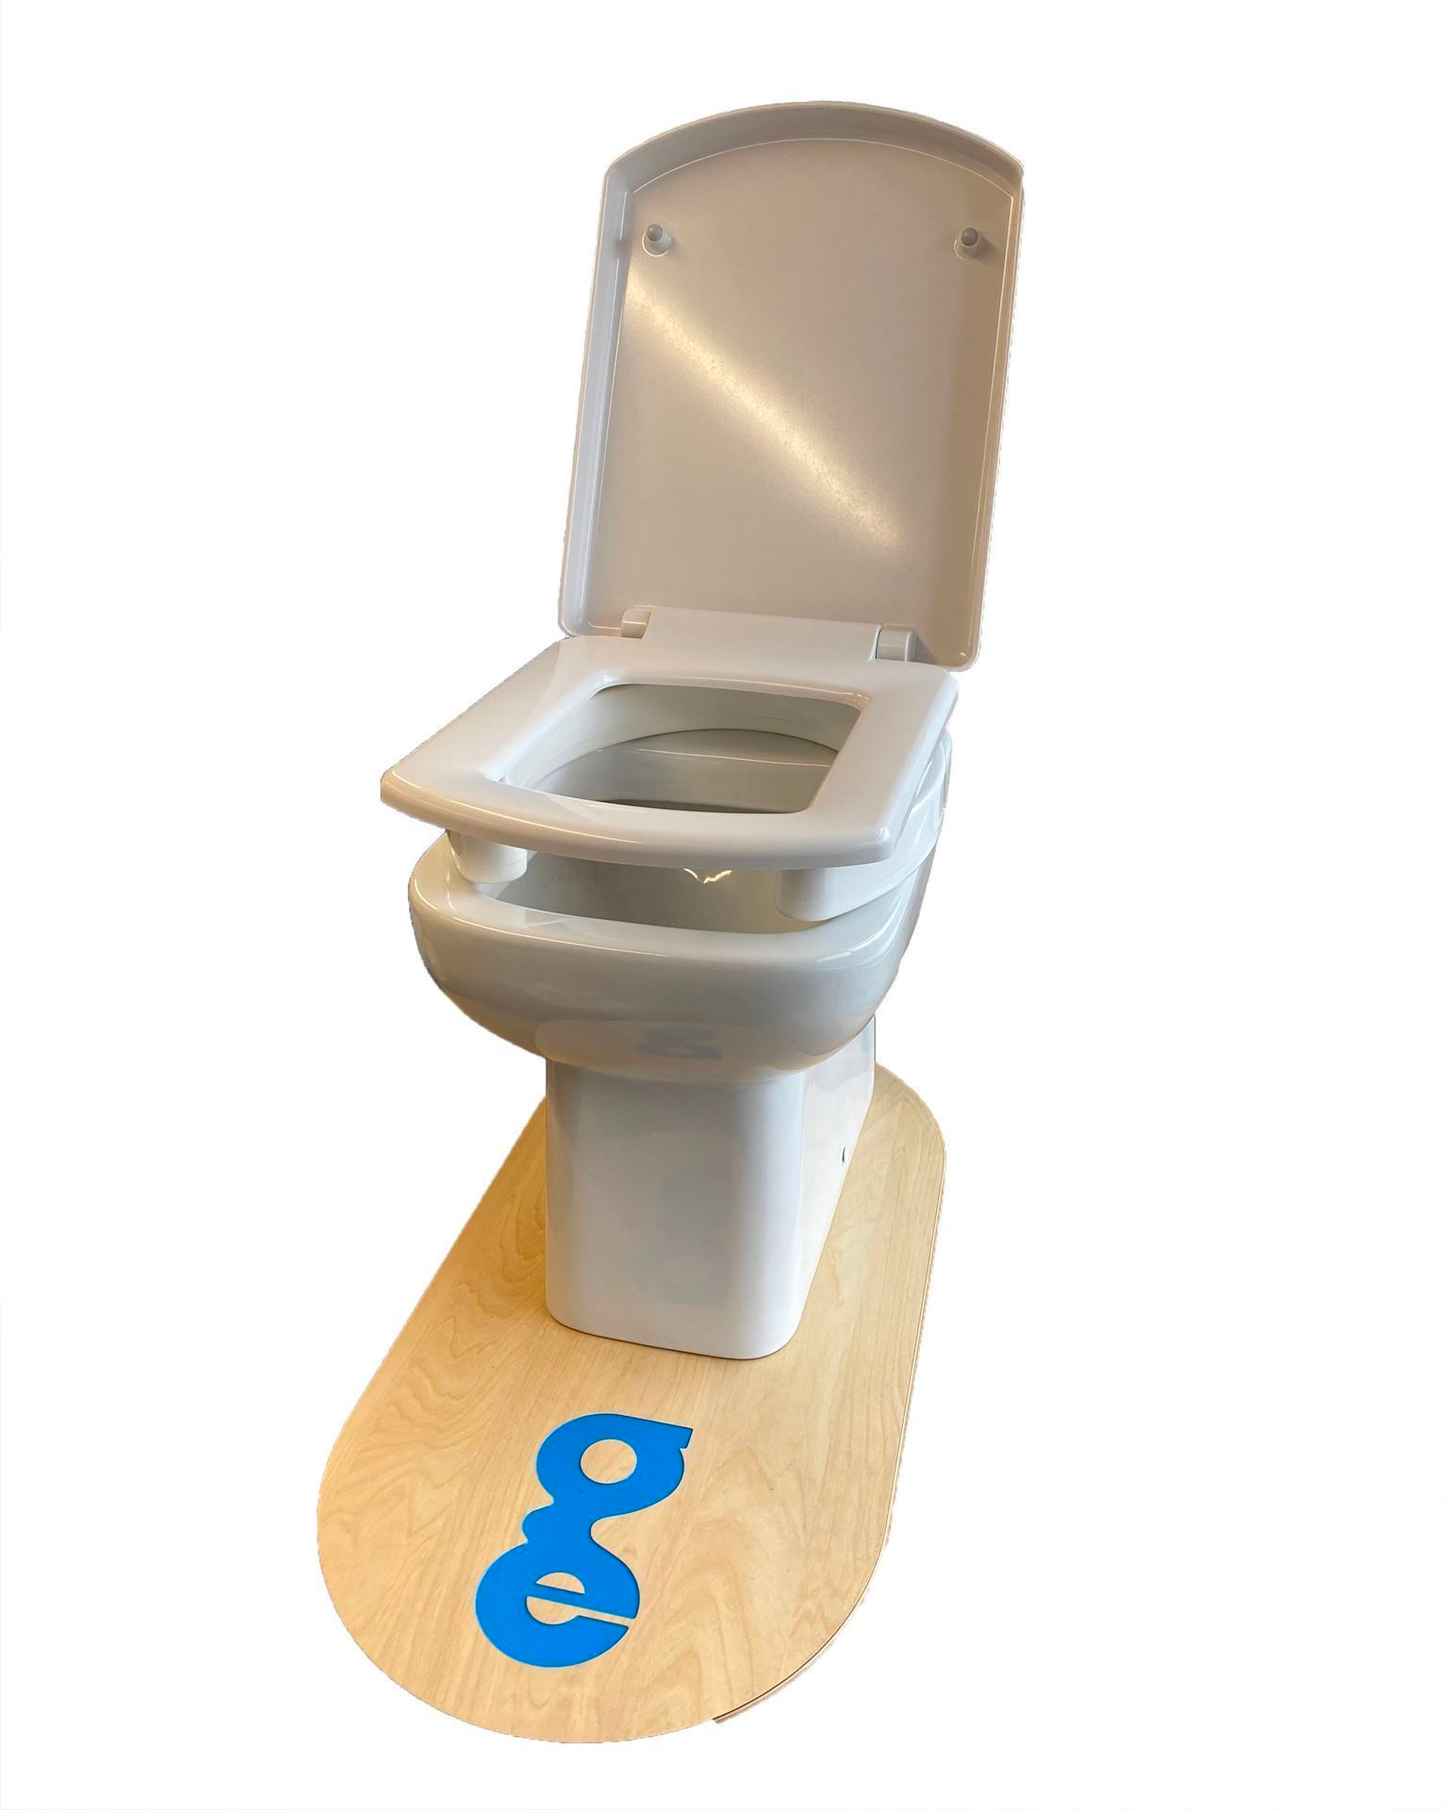 Toilet Seat Raiser 2" that fits under the existing seat it works with square and standard shaped toilets